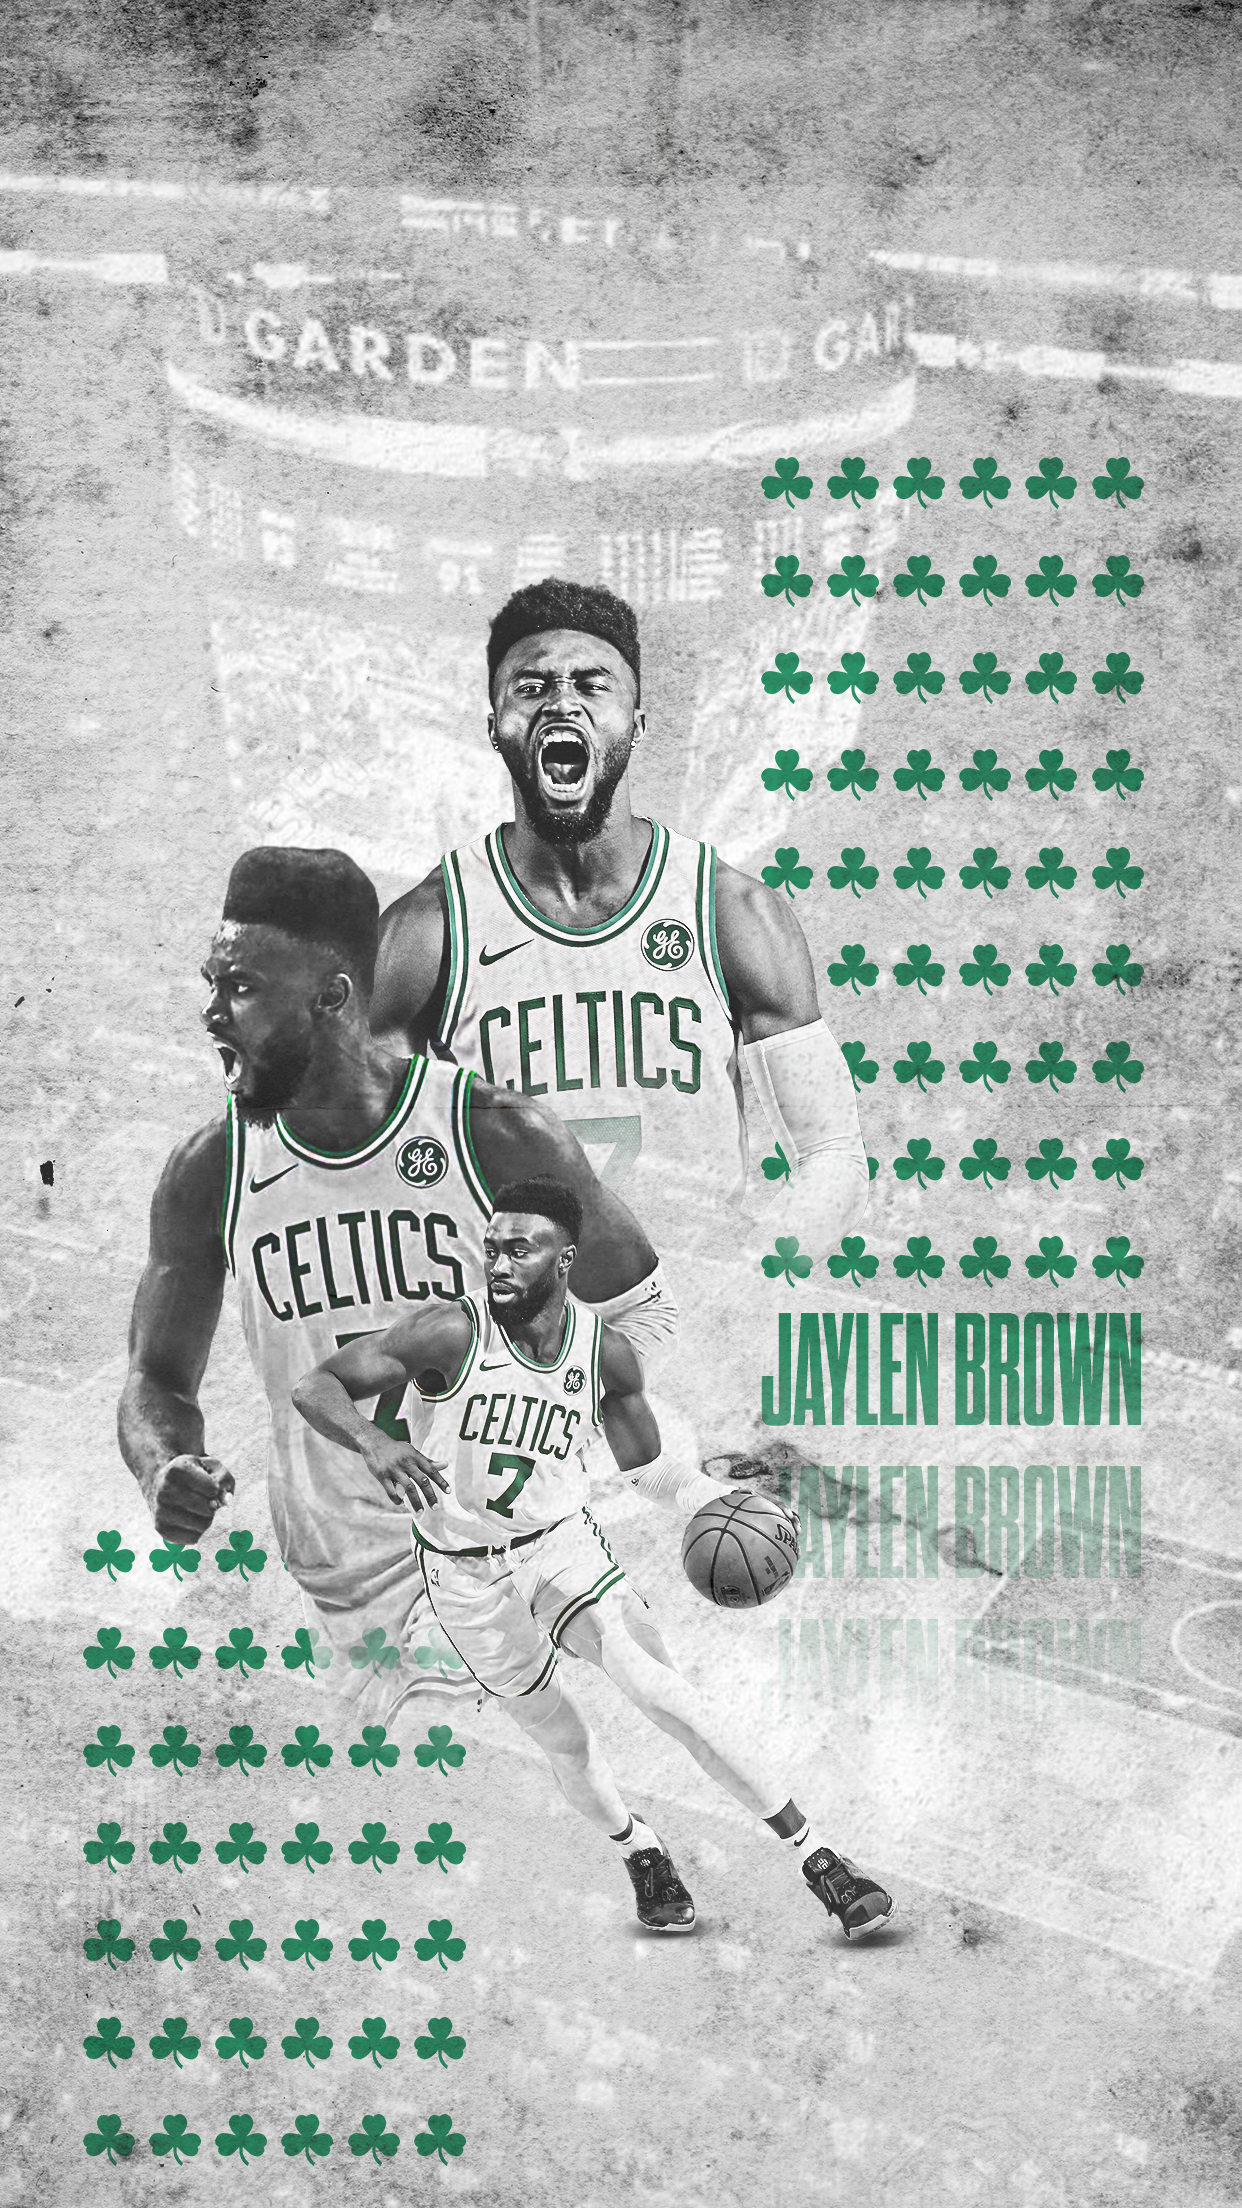 Free download wallpaper is done and in the list and i did a few test  wallpapers let 799x711 for your Desktop Mobile  Tablet  Explore 41  Boston Celtics Wallpaper Logo 